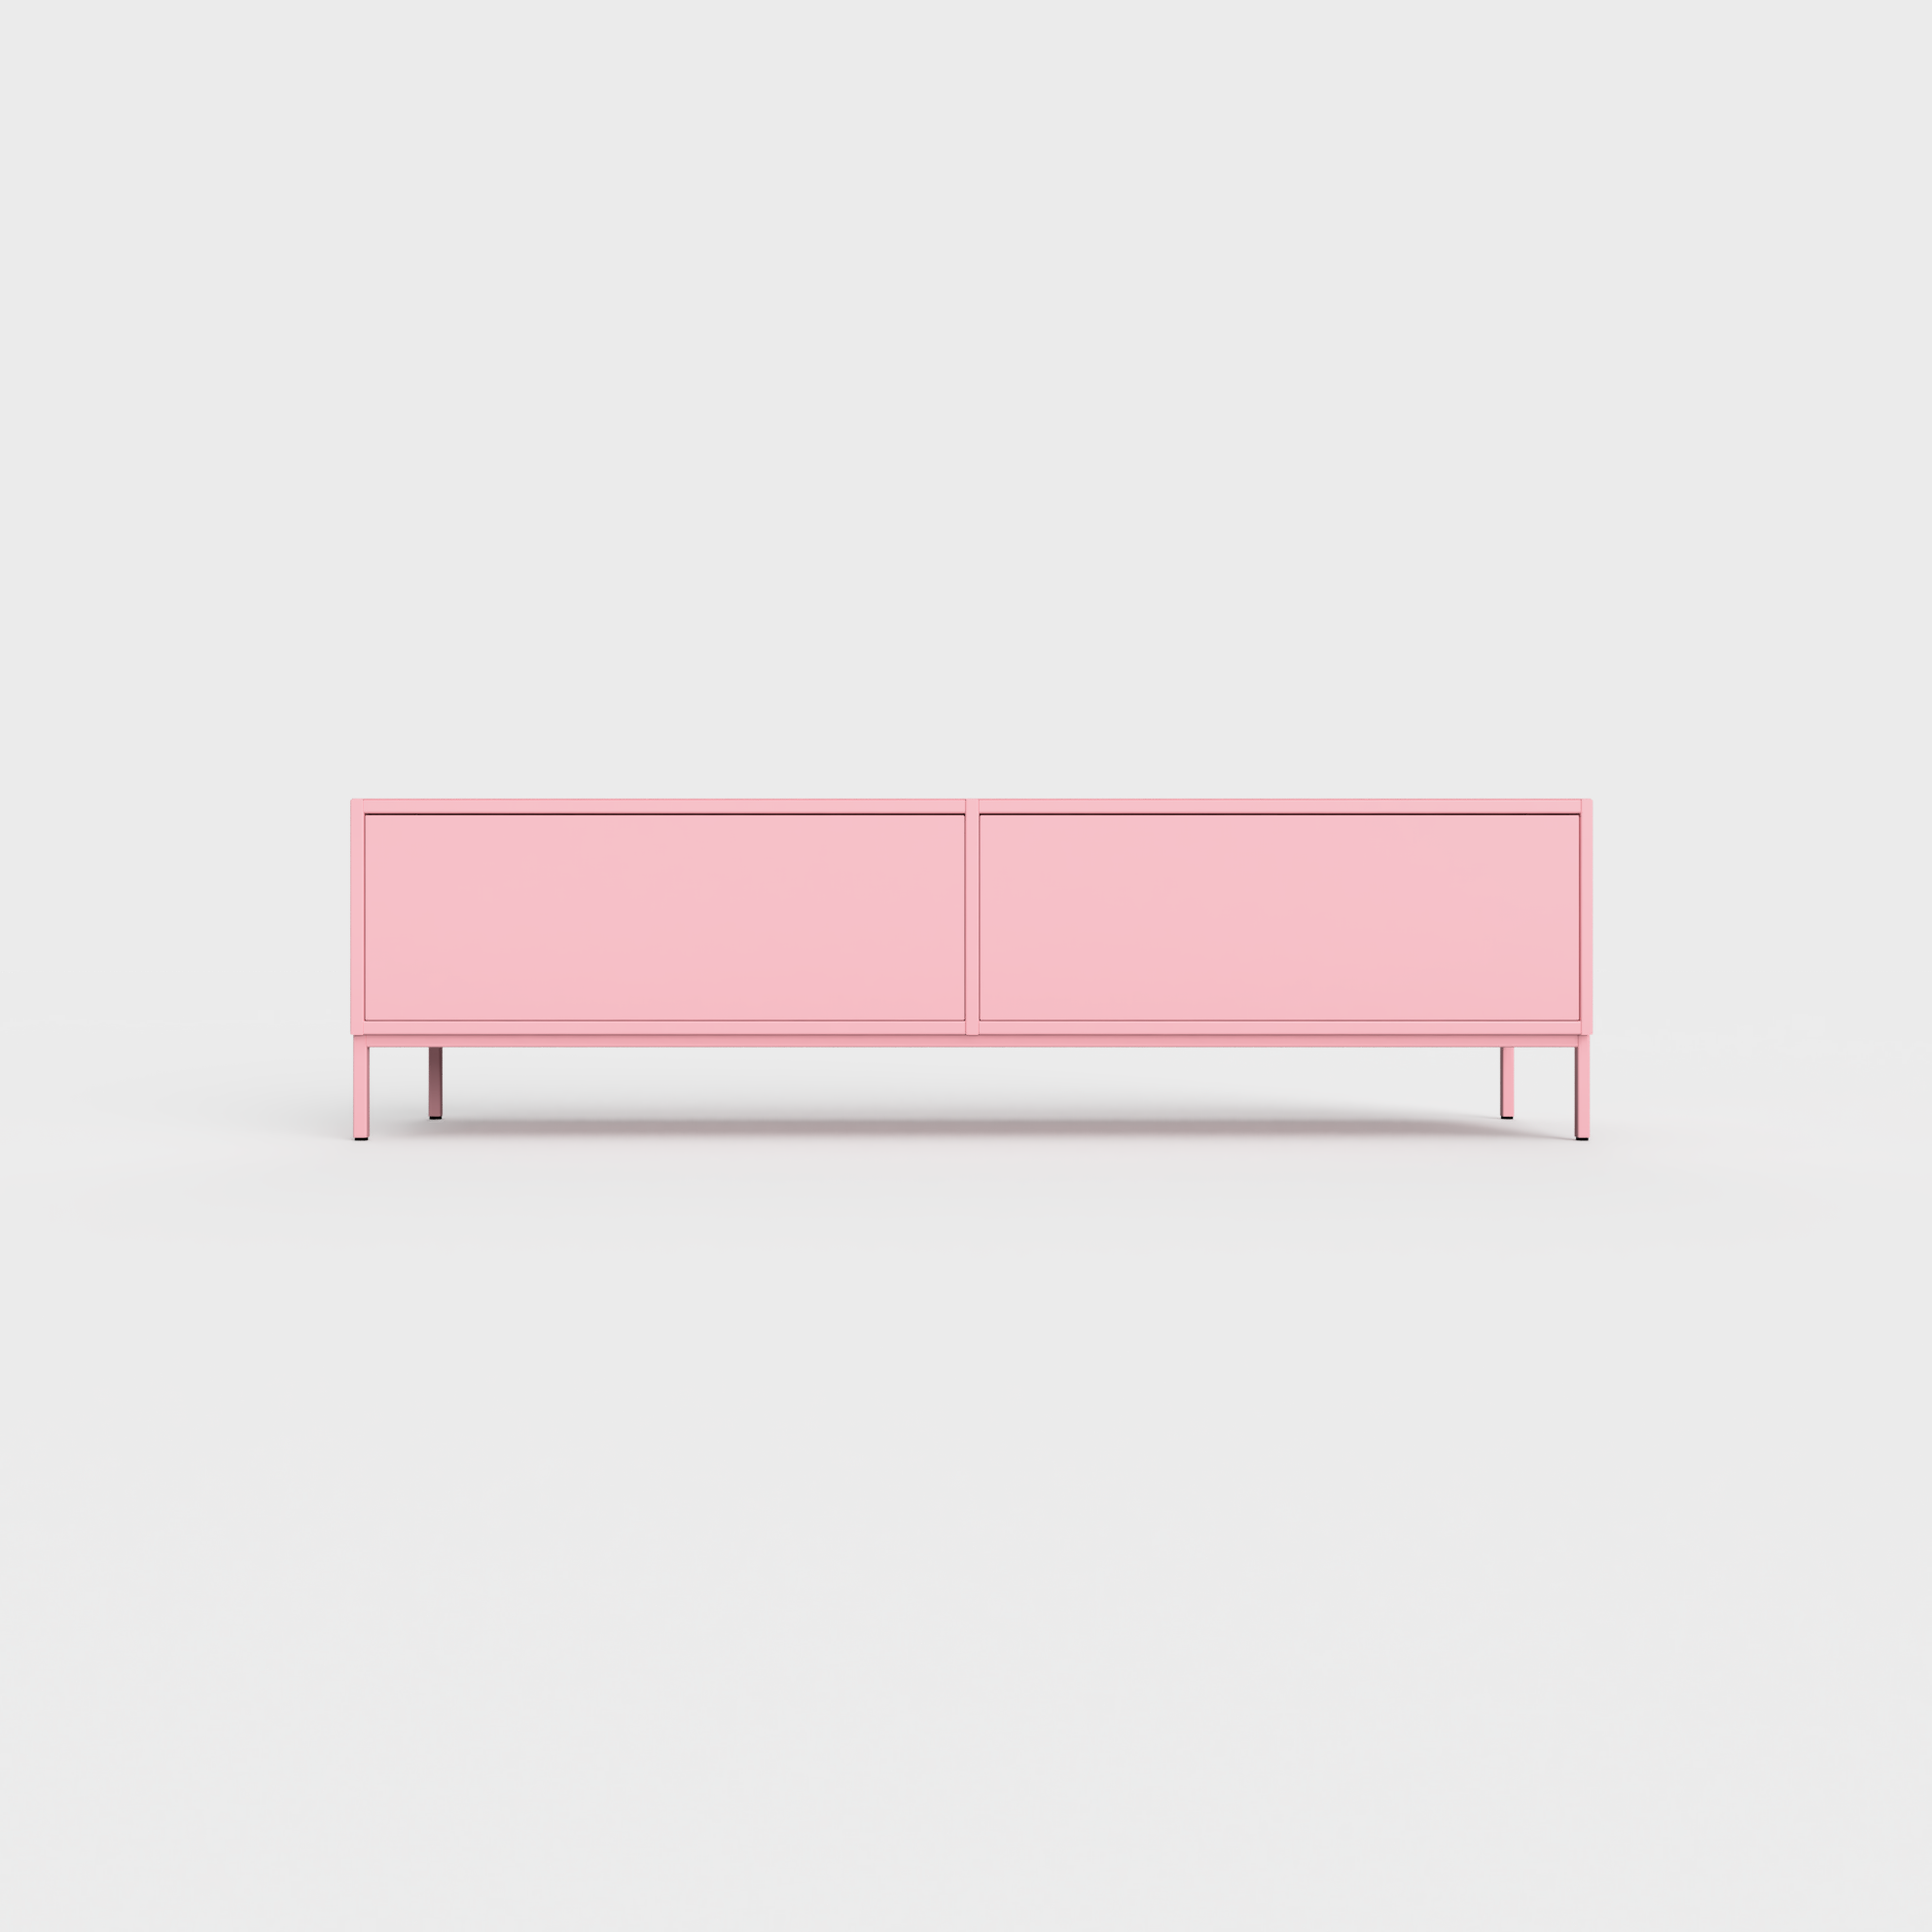 Prunus 01 Lowboard in Lily color, powder-coated steel, elegant and modern piece of furniture for your living room